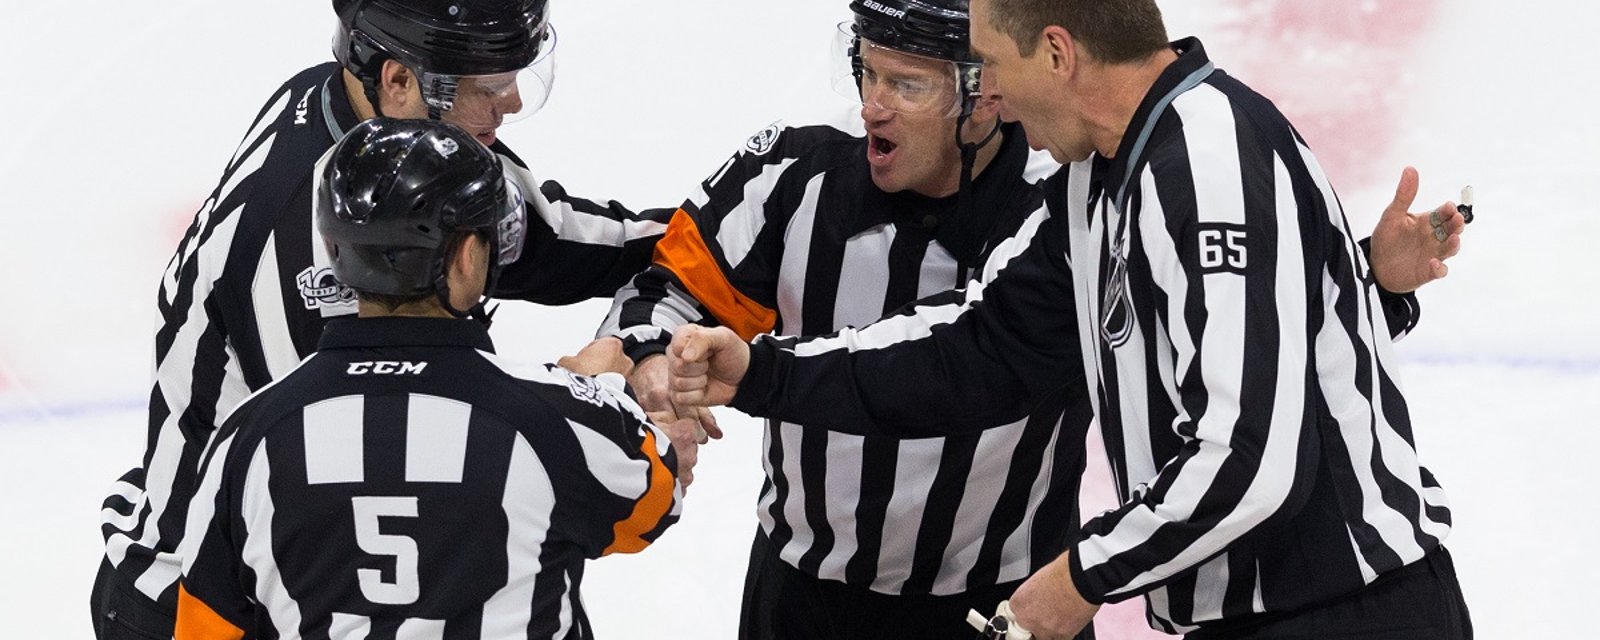 NHL attempts to explain last night's controversial goal call.